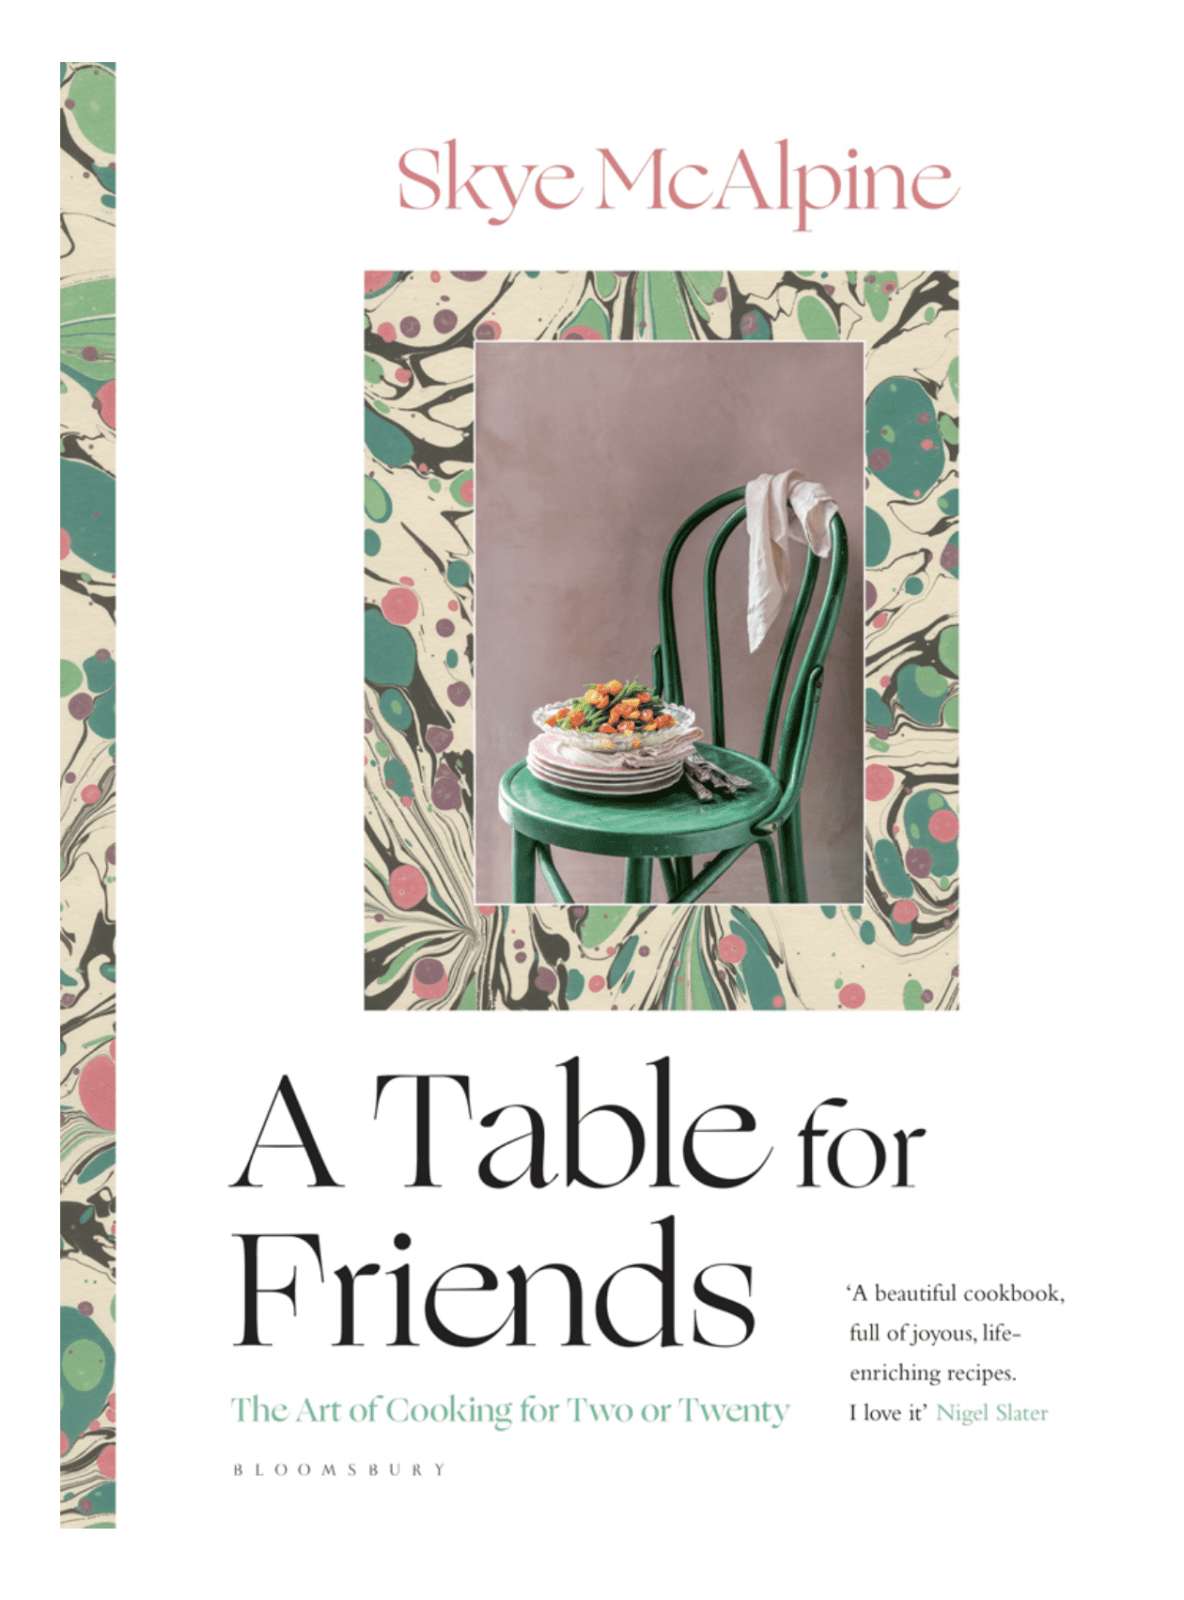 A Table for Friends